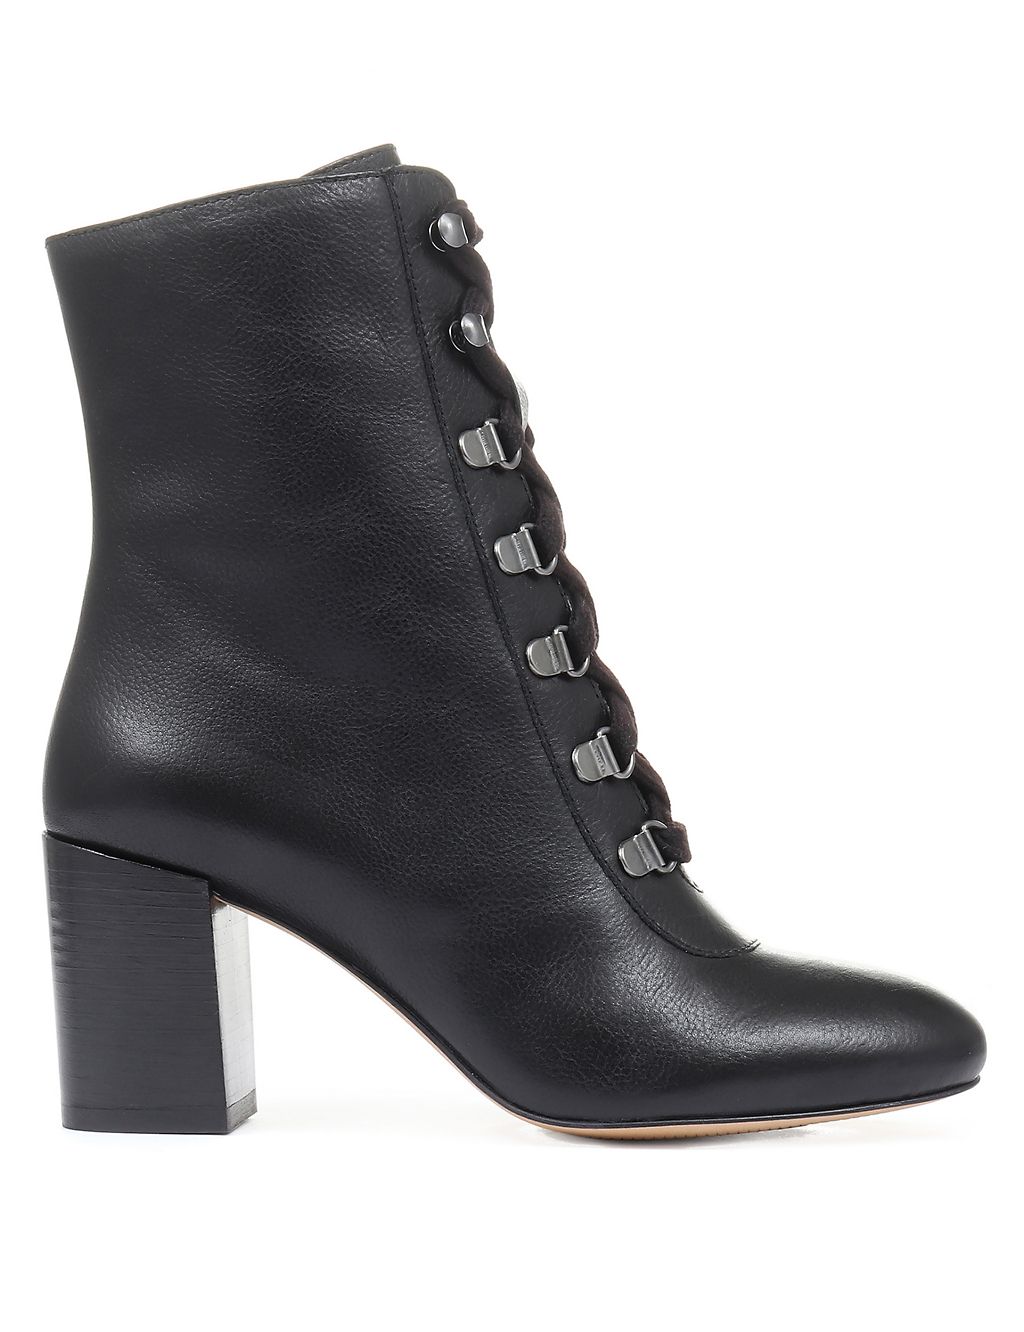 Leather Lace-Up Block Heel Ankle Boots | Jones Bootmaker | M&S